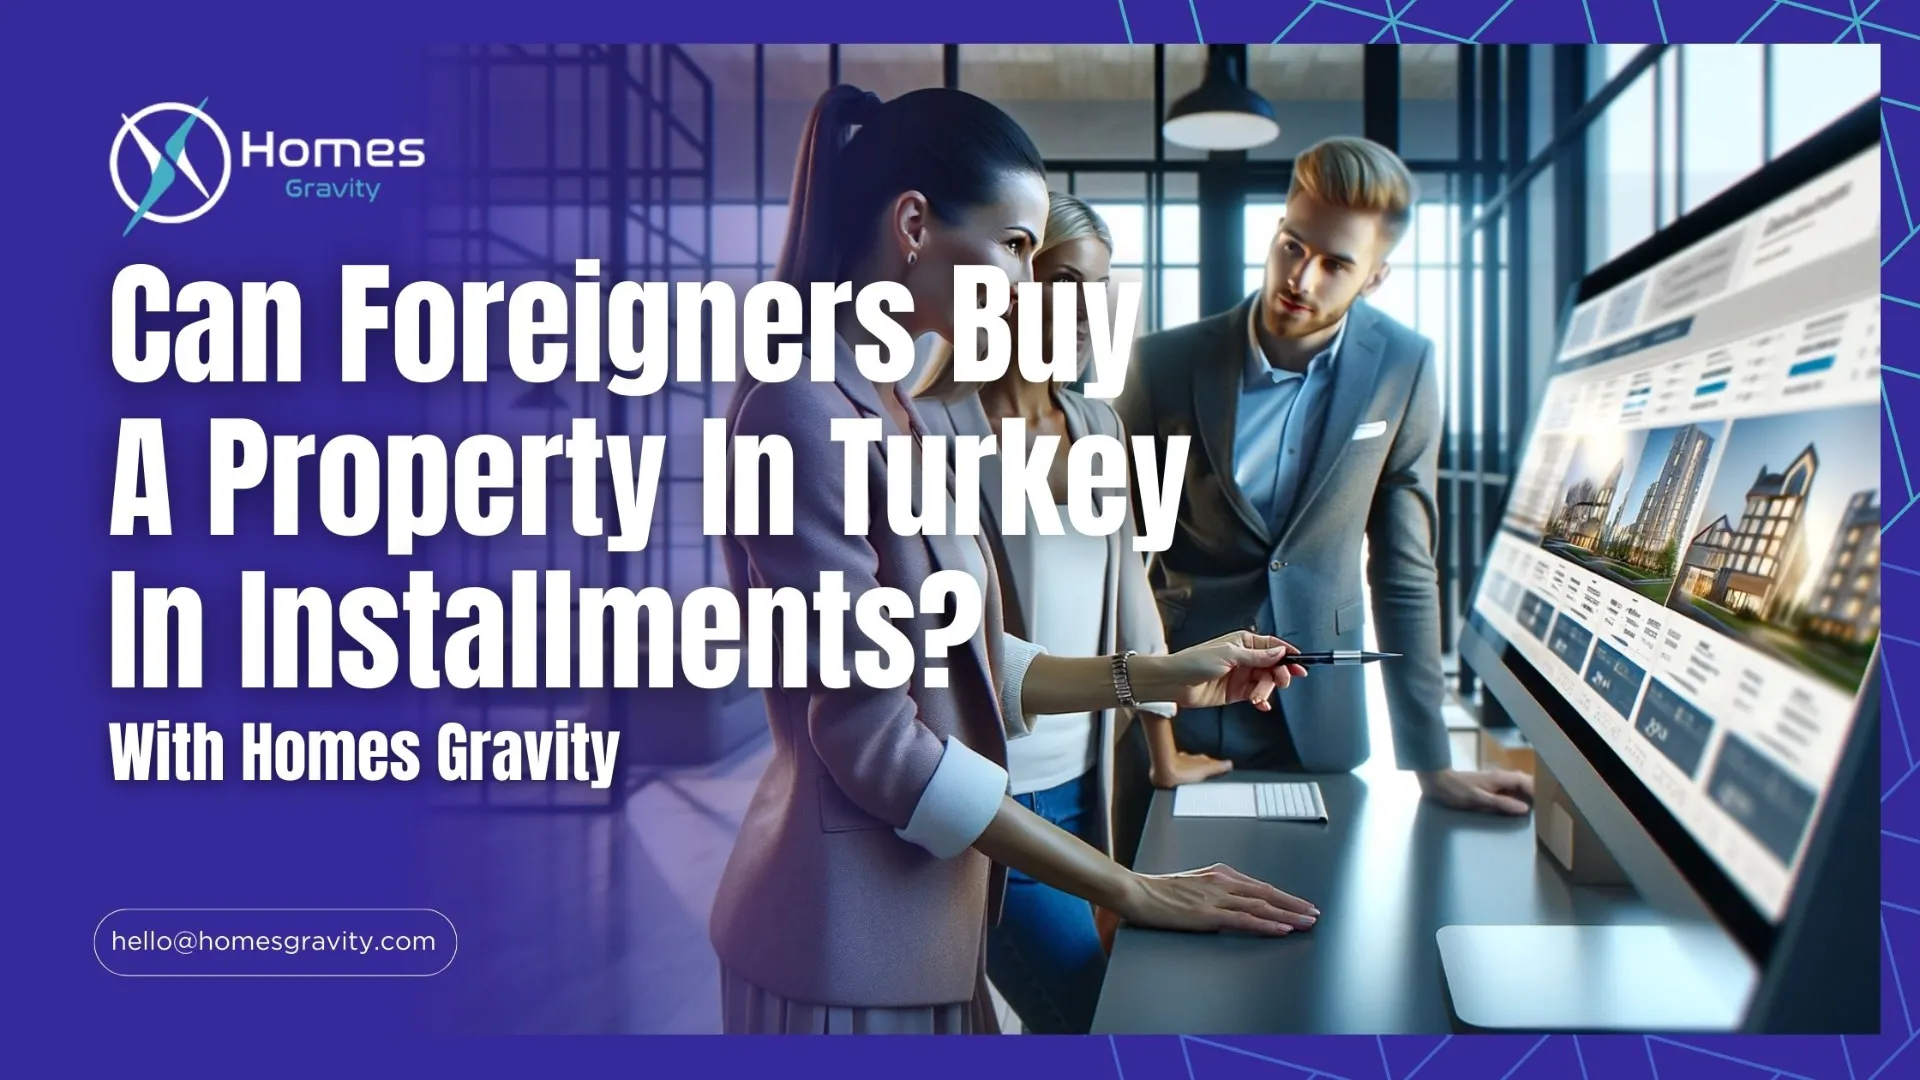 Can Foreigners Buy A Property In Turkey In Installments? get help from Homes Gravity